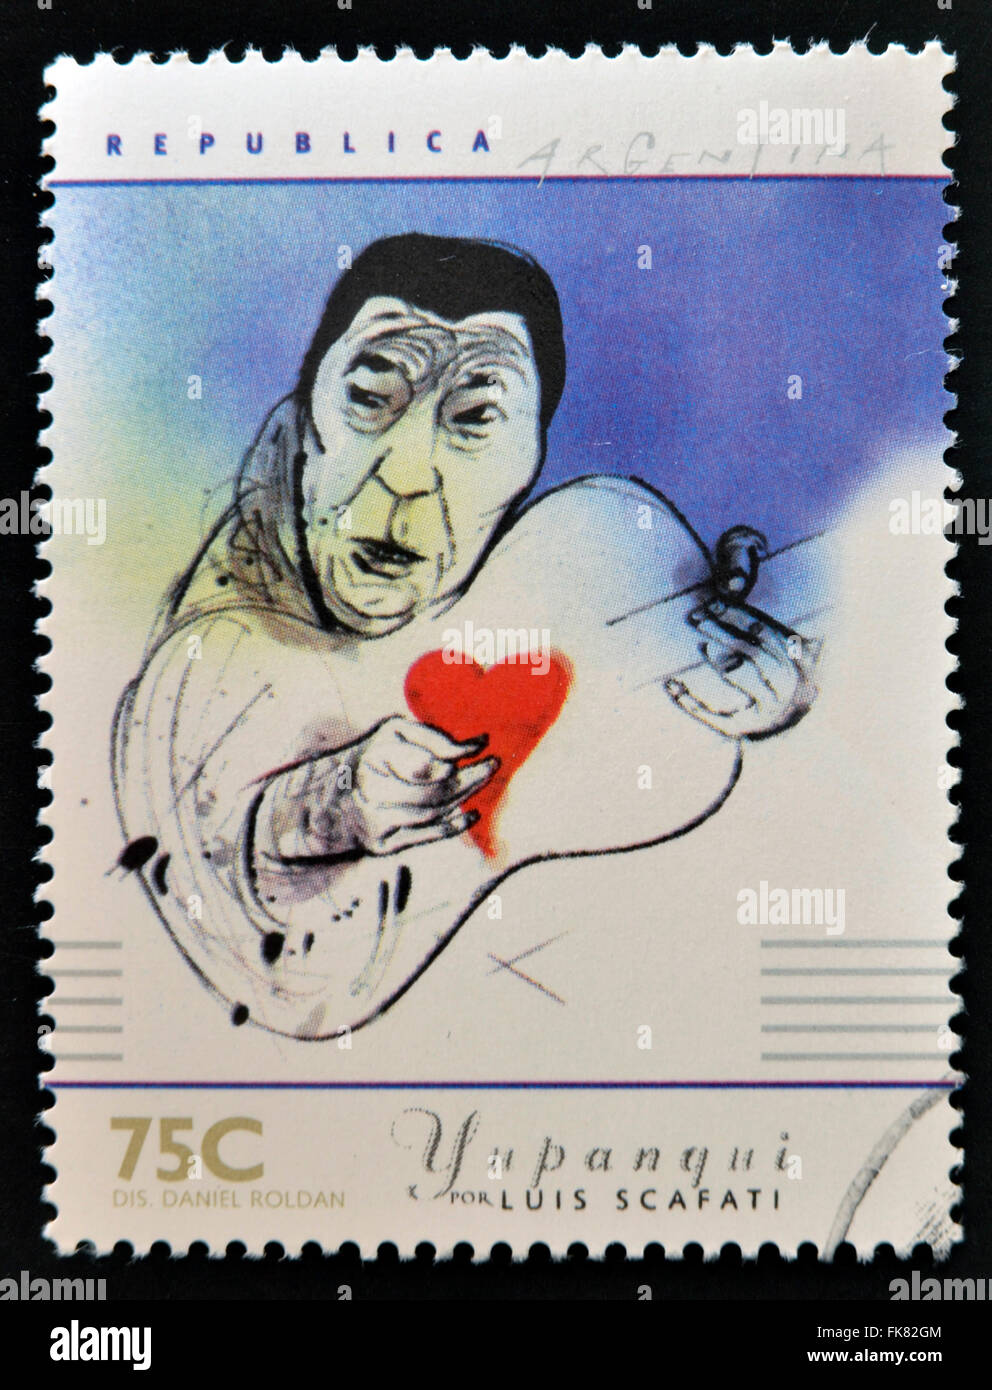 ARGENTINA - CIRCA 1997: A stamp printed in Argentina dedicated to argentinian musicians, shows Atahualpa Yupanqui by Luis Scafat Stock Photo